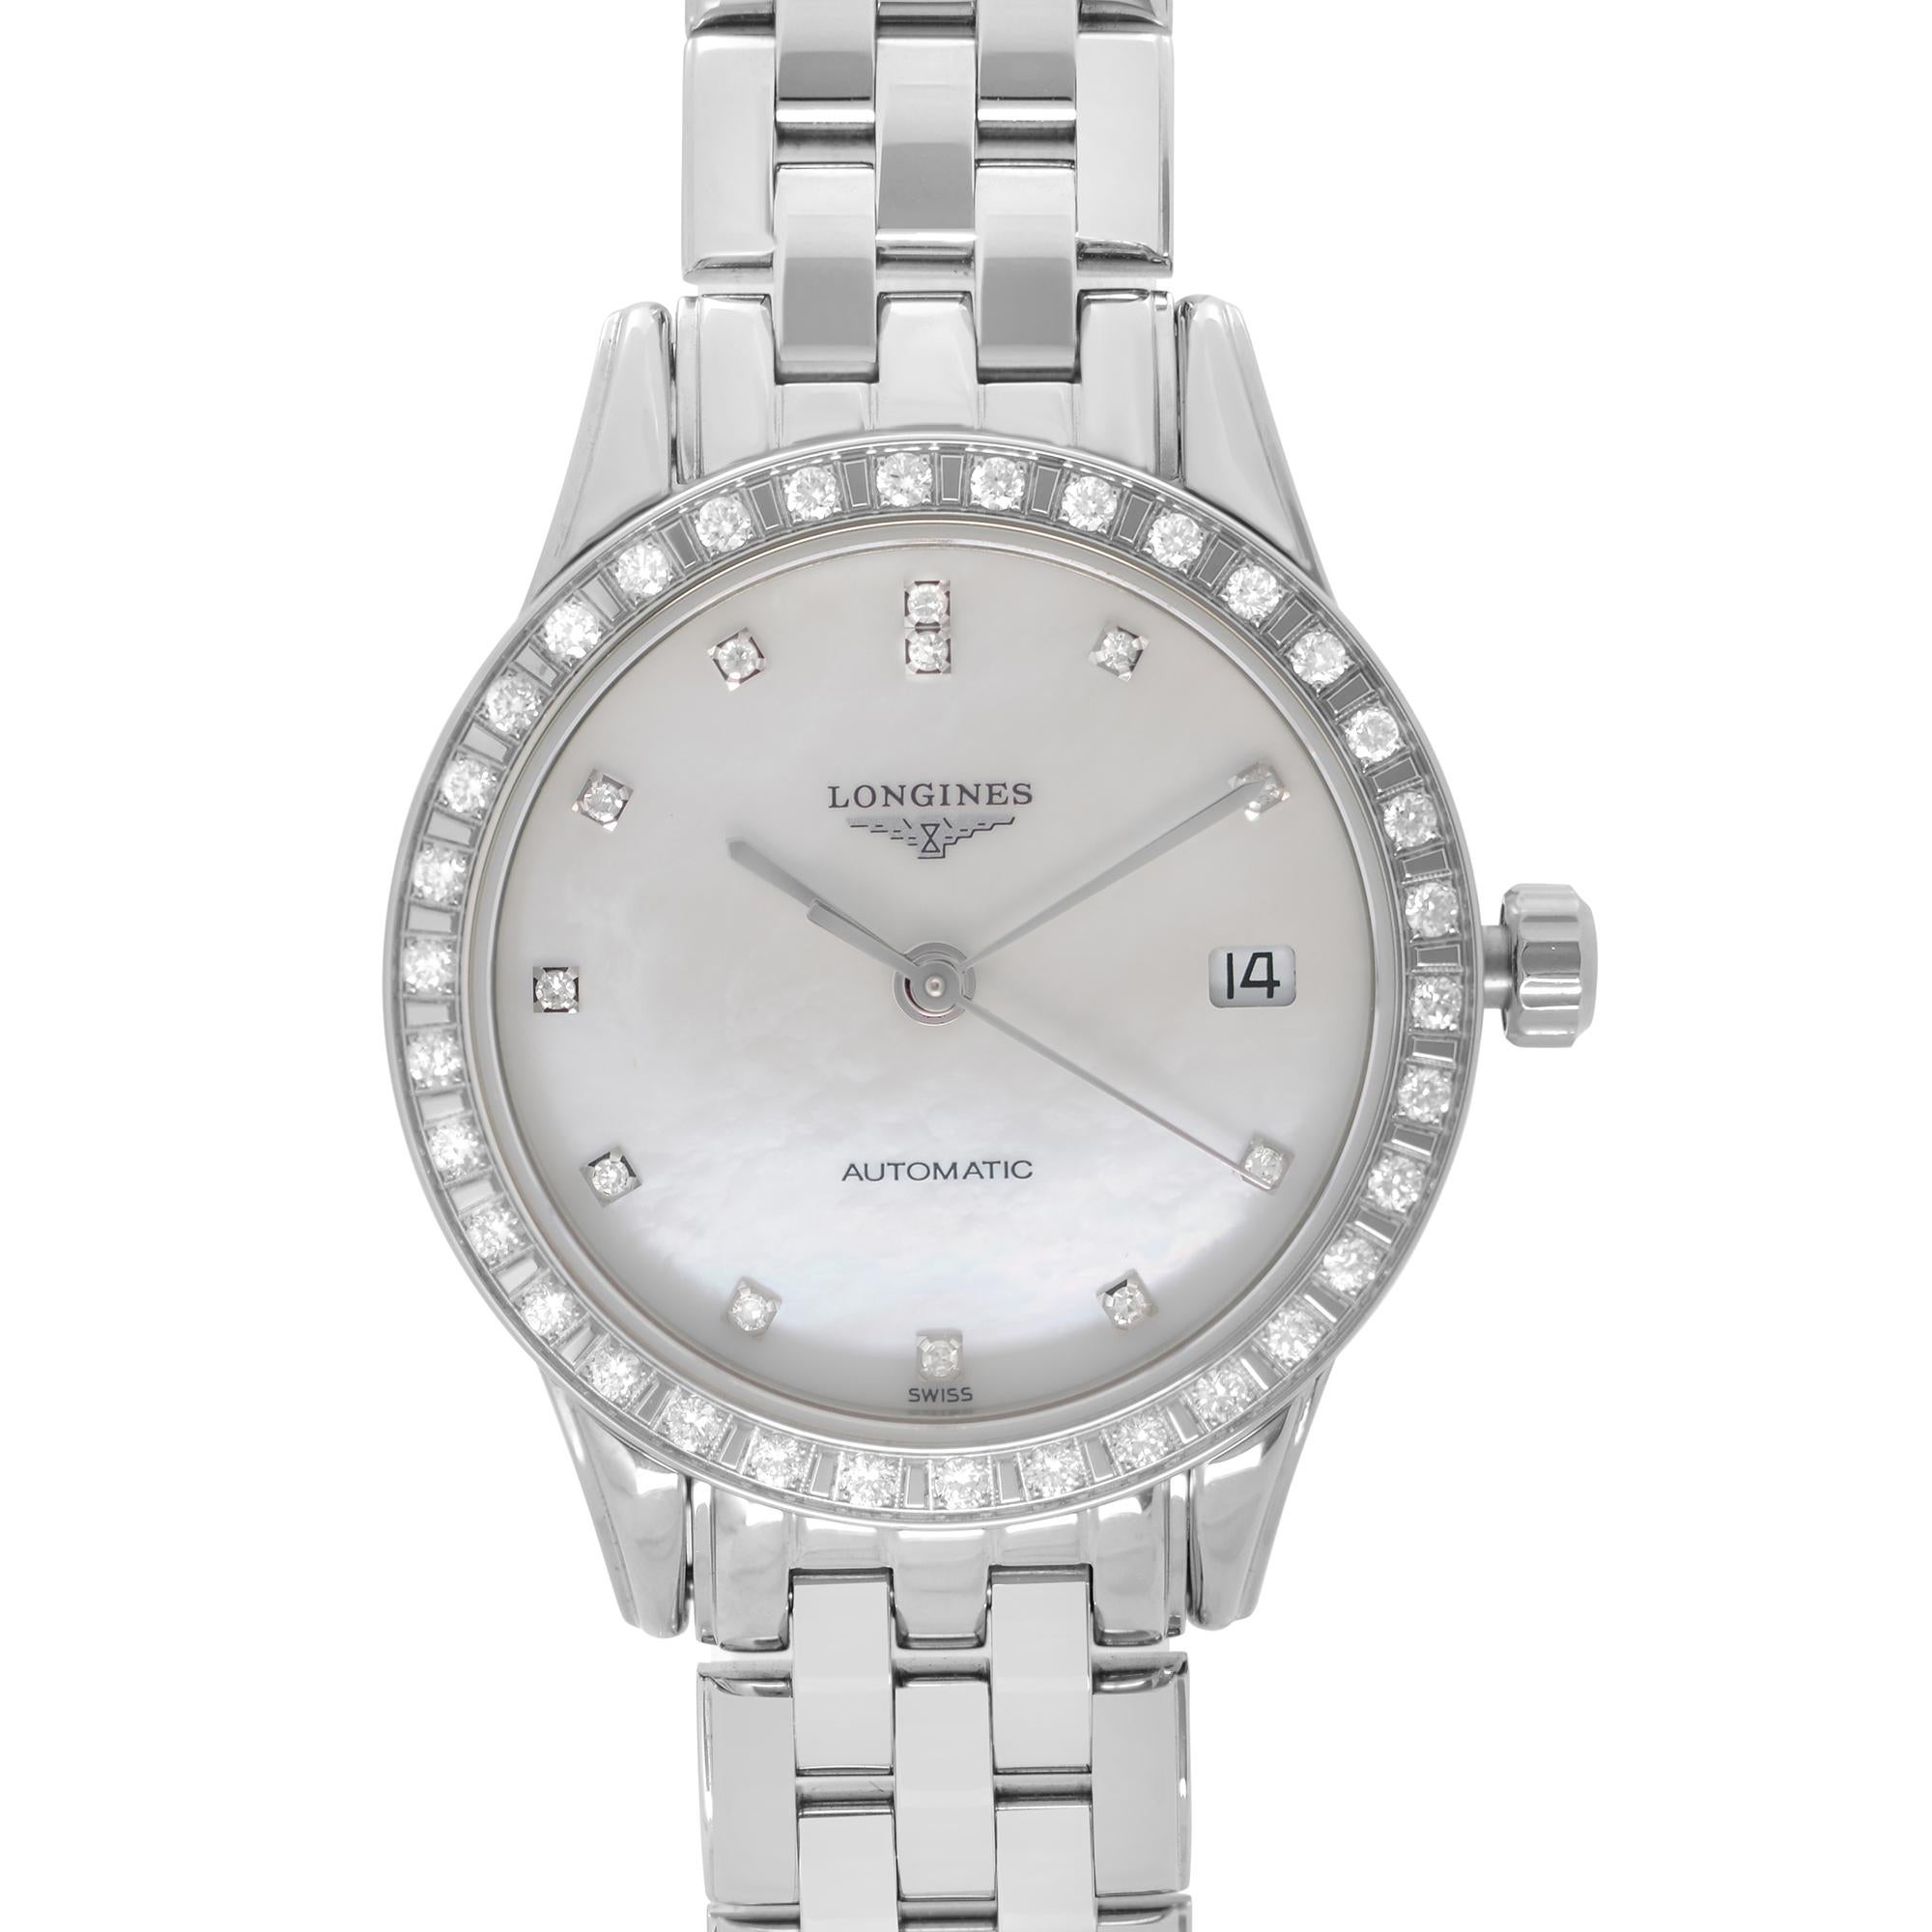 Display Model Longines Flagship Stainless Steel Mother of Pearl Dial Automatic Ladies Watch L4.274.0.87.6 This Beautiful Timepiece is Powered by Mechanical (Automatic) Movement And Features: Round Stainless Steel Case & Bracelet Fixed Stainless